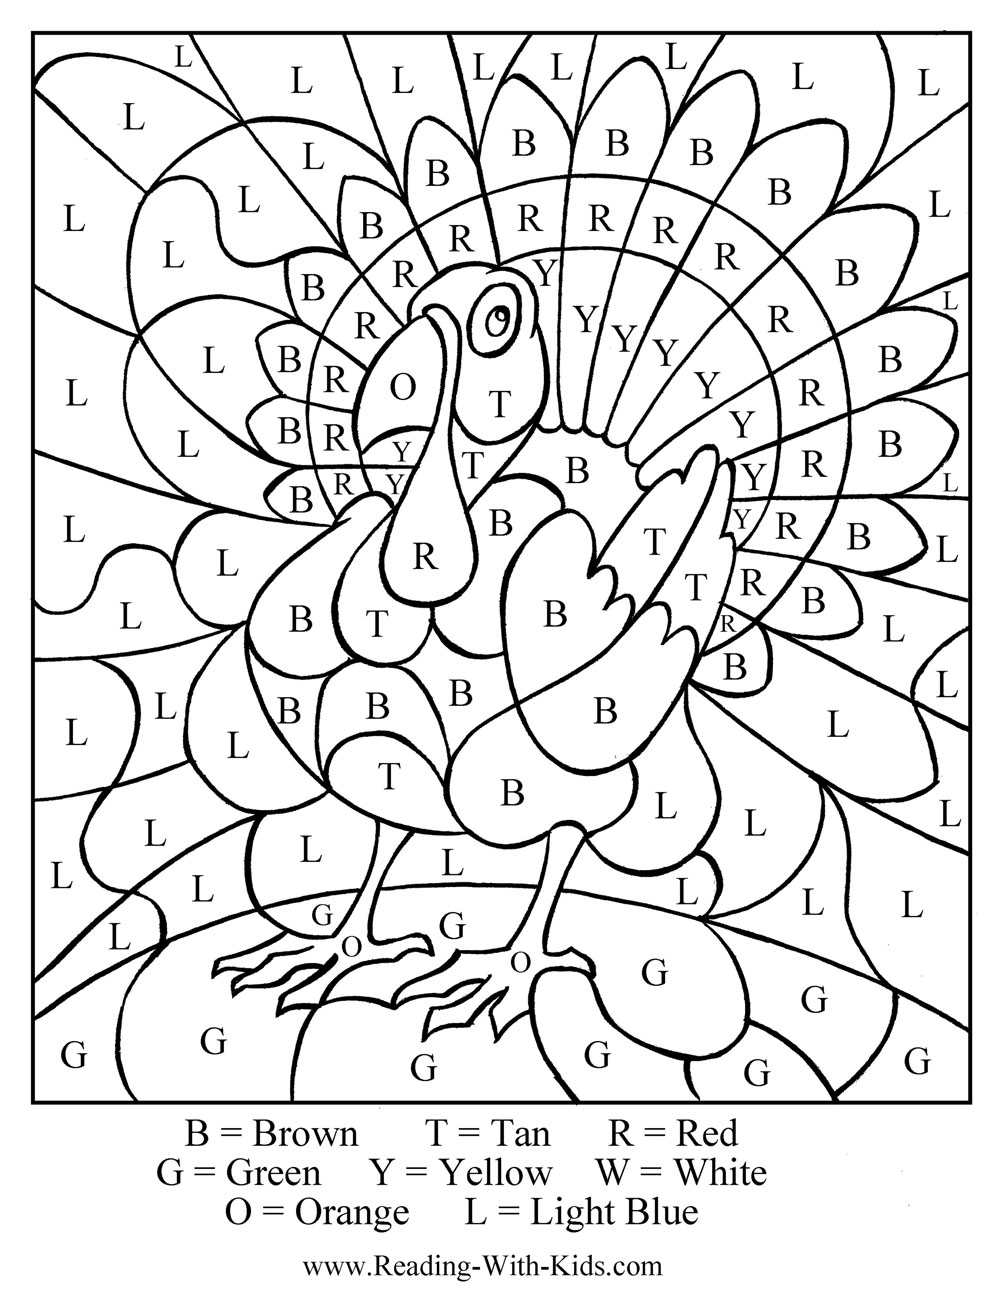 ThanksGiving coloring #15, Download drawings